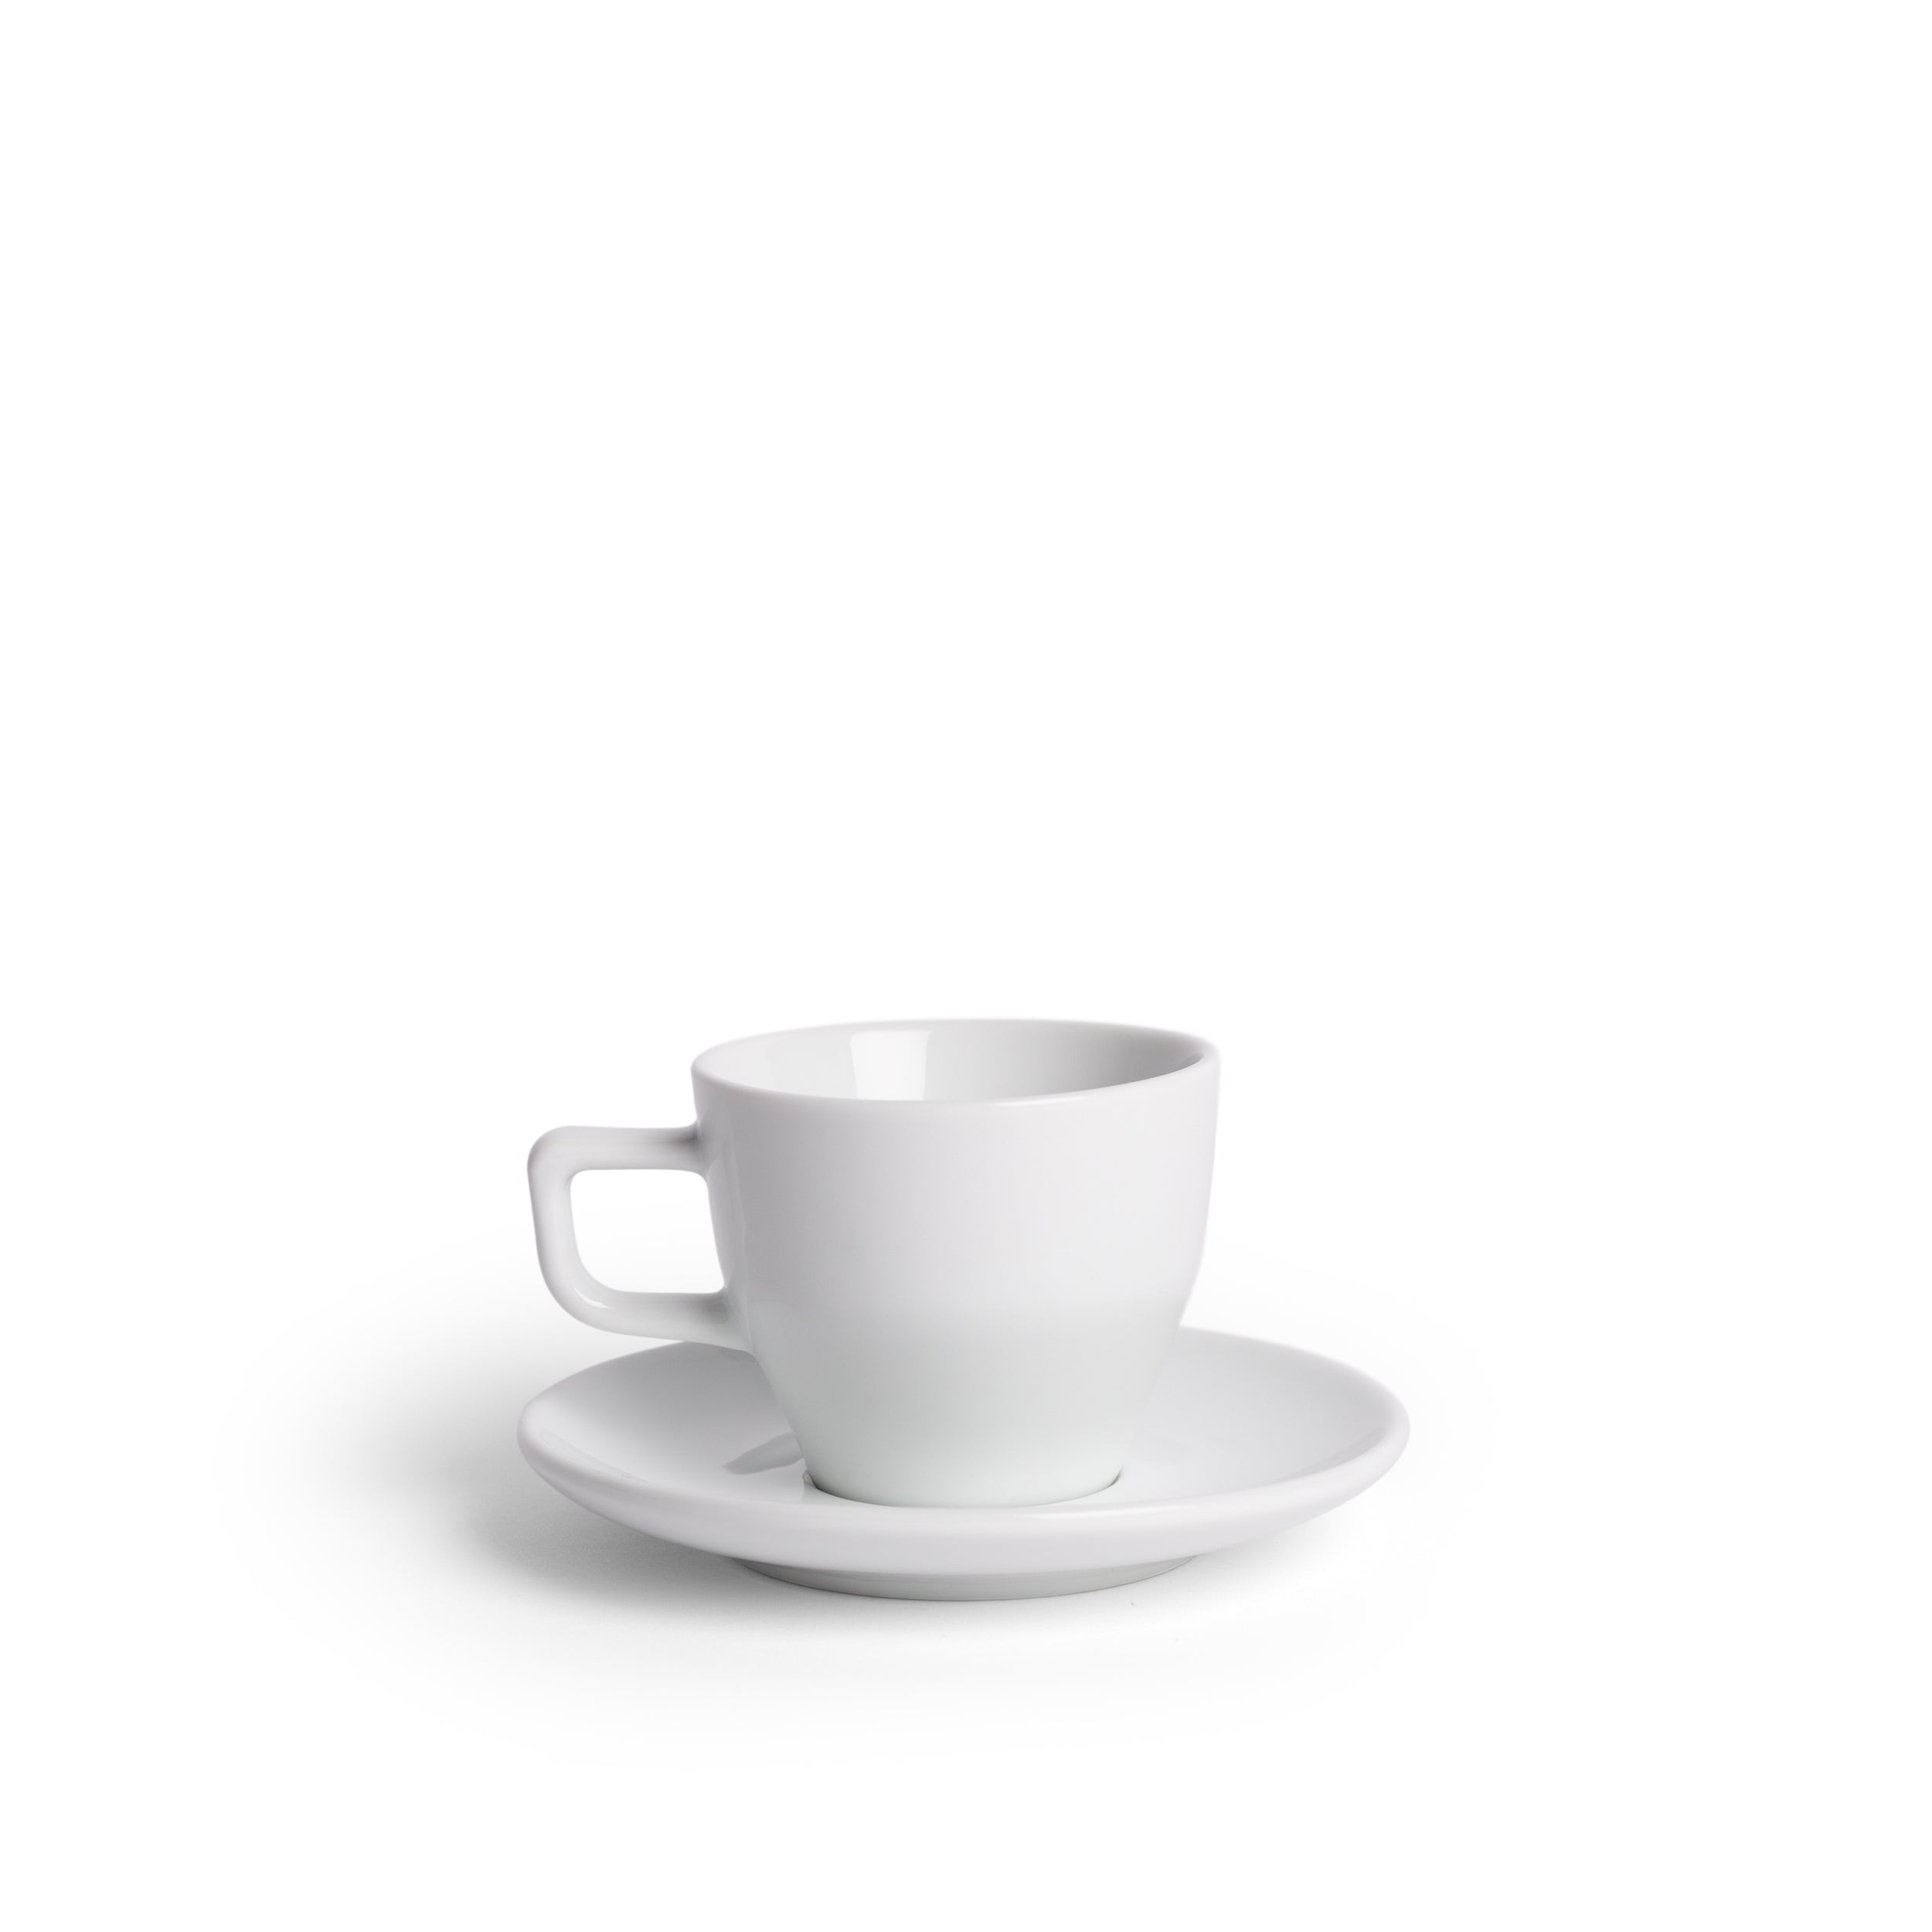 https://cdn.shopify.com/s/files/1/0289/8867/0038/products/ssph.zone-1671816537-Small_cup_and_Saucer.jpg?v=1671816779&width=2500